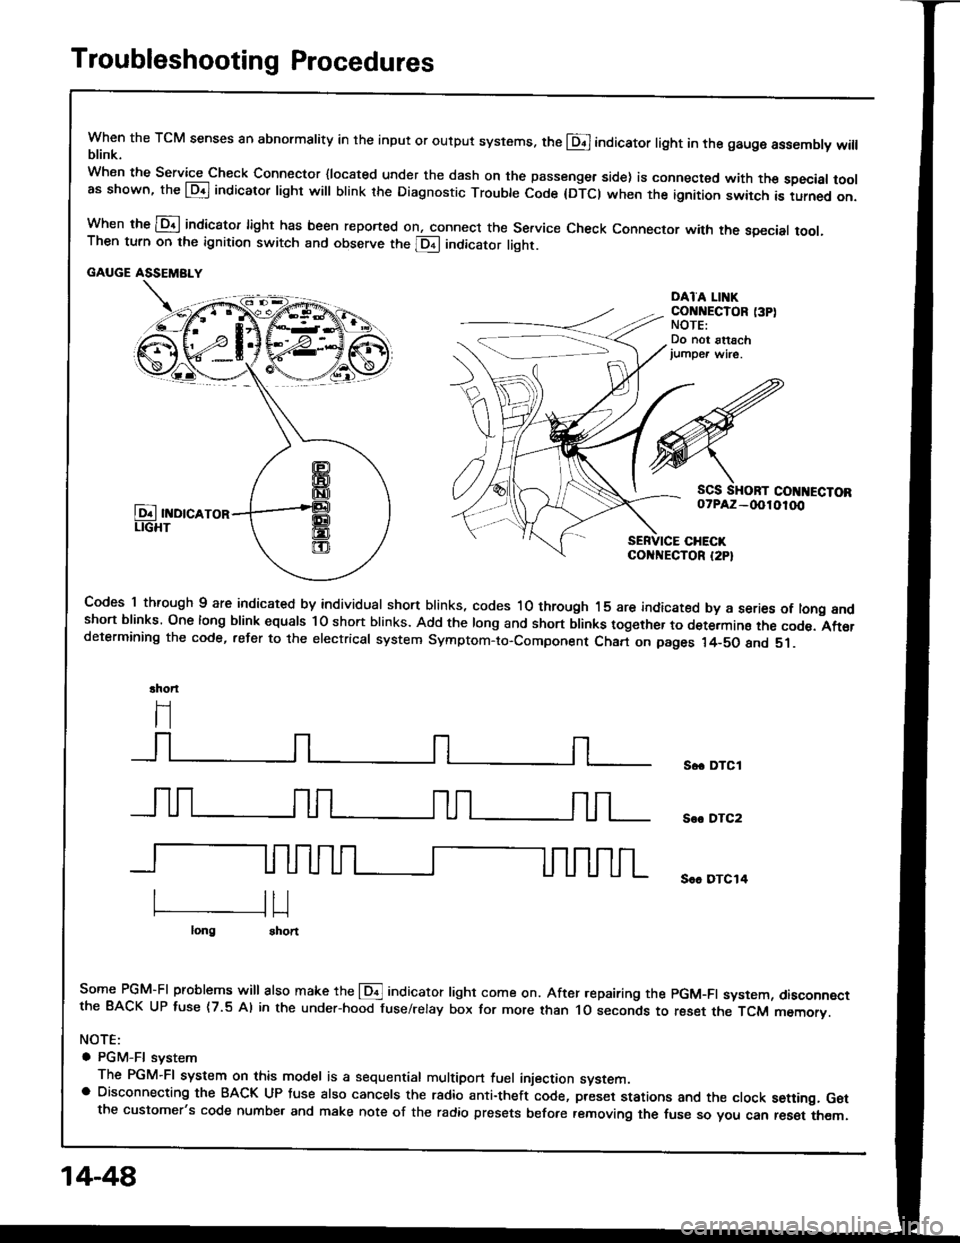 ACURA INTEGRA 1994  Service Repair Manual Troubleshooting Procedures
when the TcM senses an abnormality in the input or output systems. the E]indicator light in the gaugo assembly willblink.
when the service check Connector {located under the